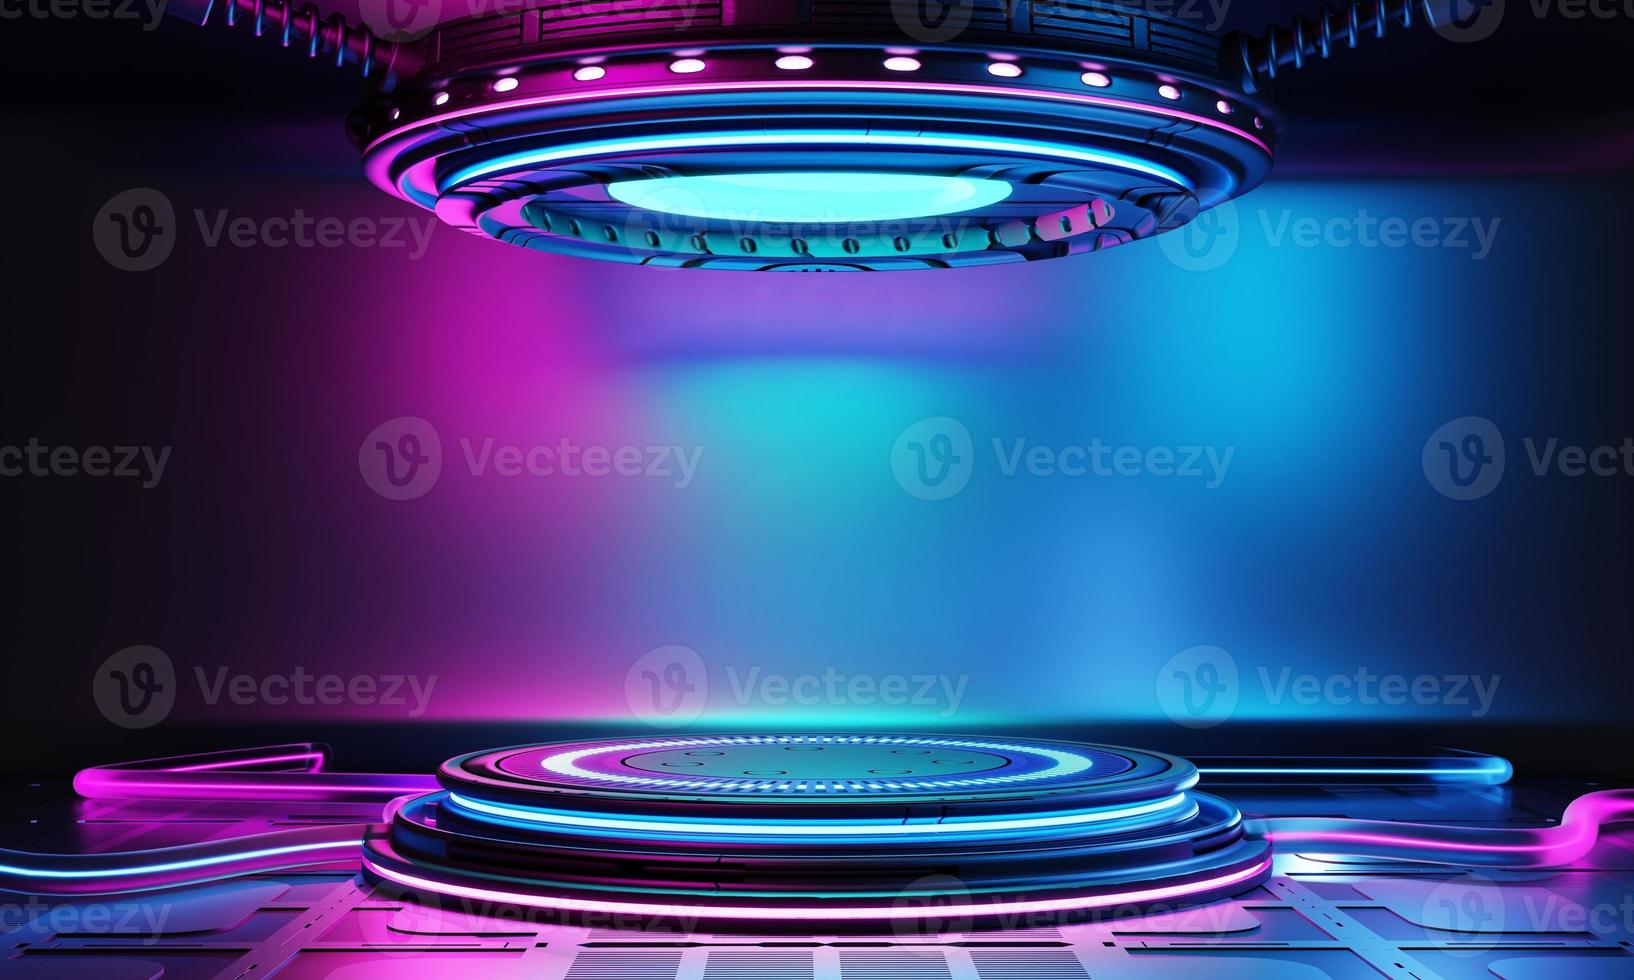 Cyberpunk sci-fi product podium showcase in empty room with blue and pink background. Technology and entertainment object concept. 3D illustration rendering photo